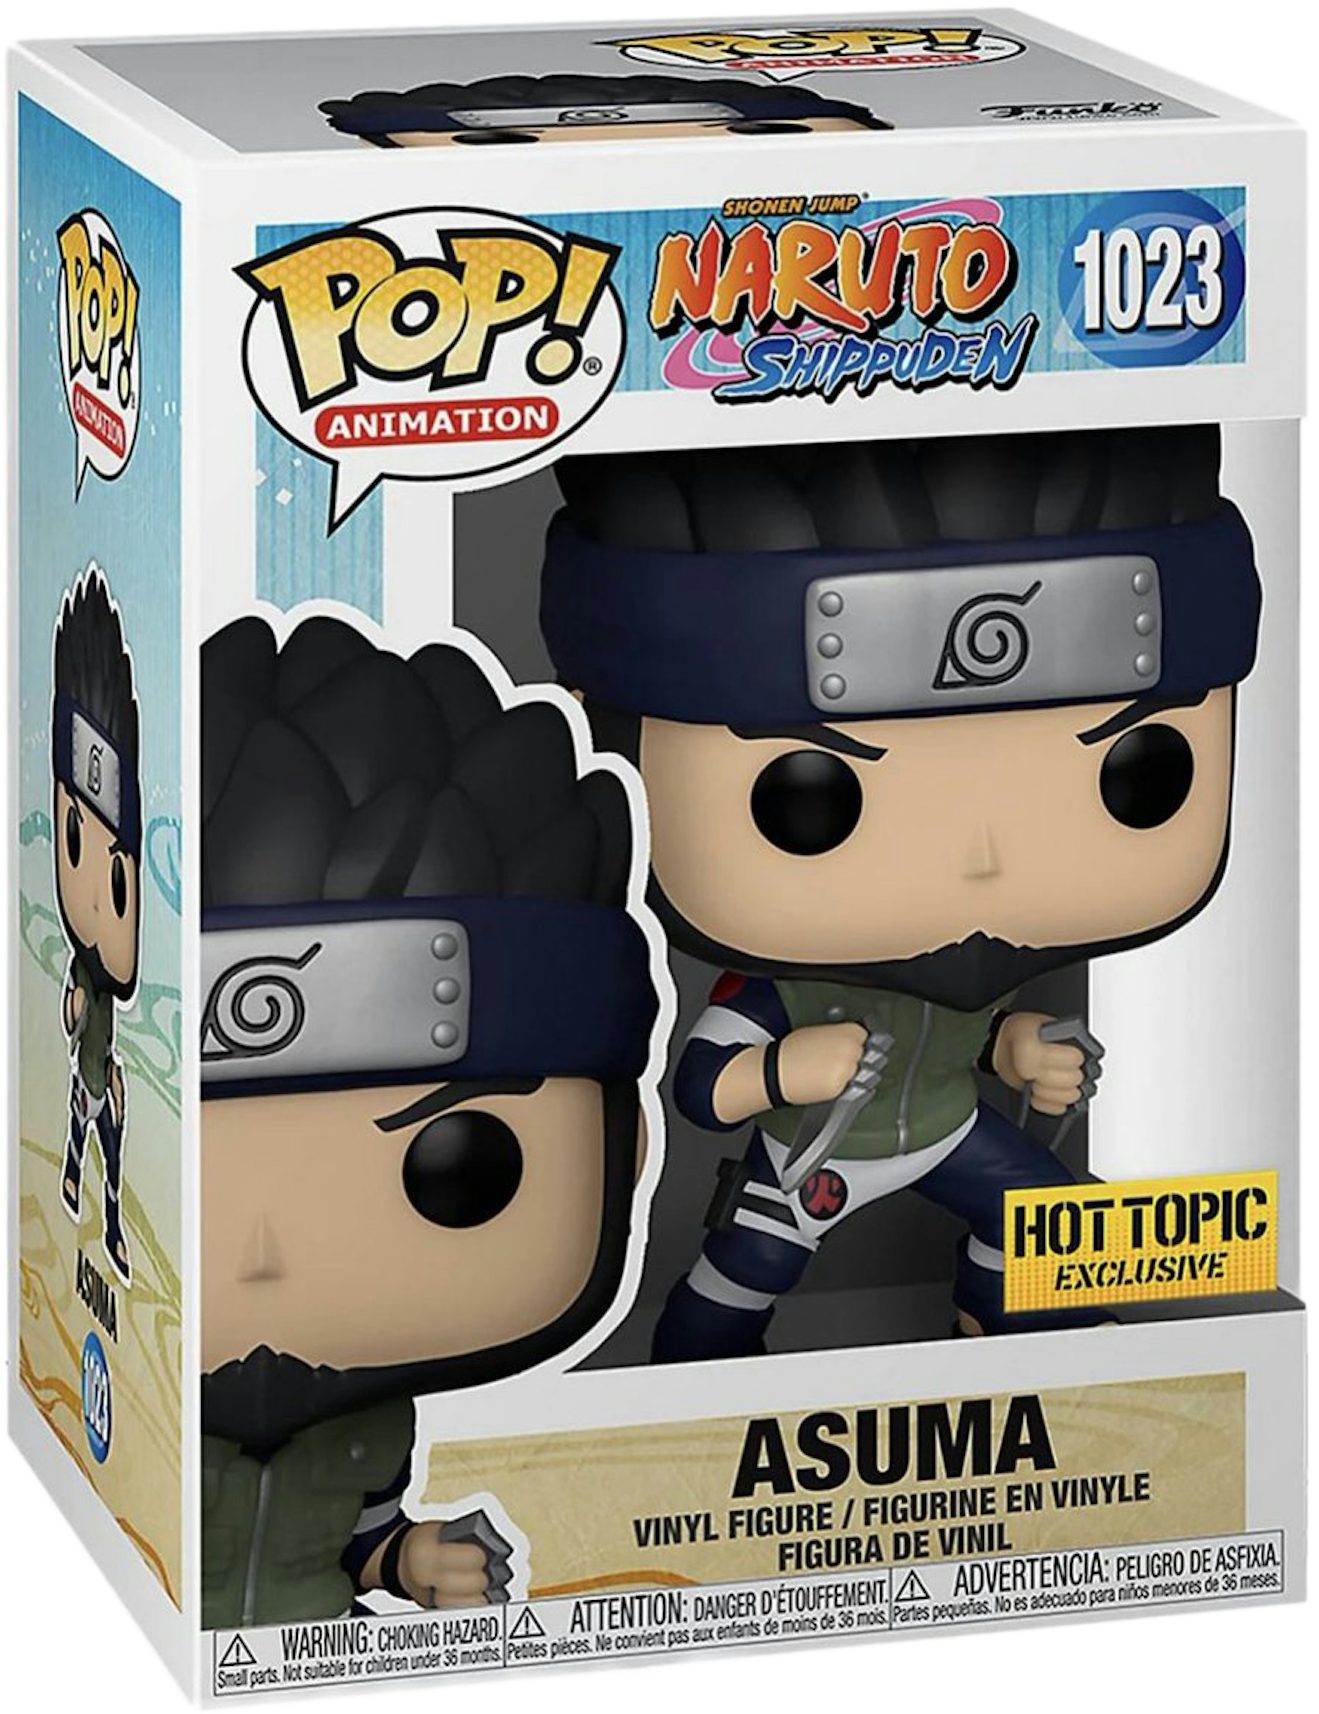 https://images.stockx.com/images/Funko-Pop-Animation-Naruto-Shippuden-Asuma-Hot-Topic-Exclusive-Figure-1023.jpg?fit=fill&bg=FFFFFF&w=1200&h=857&fm=jpg&auto=compress&dpr=2&trim=color&updated_at=1633491013&q=60